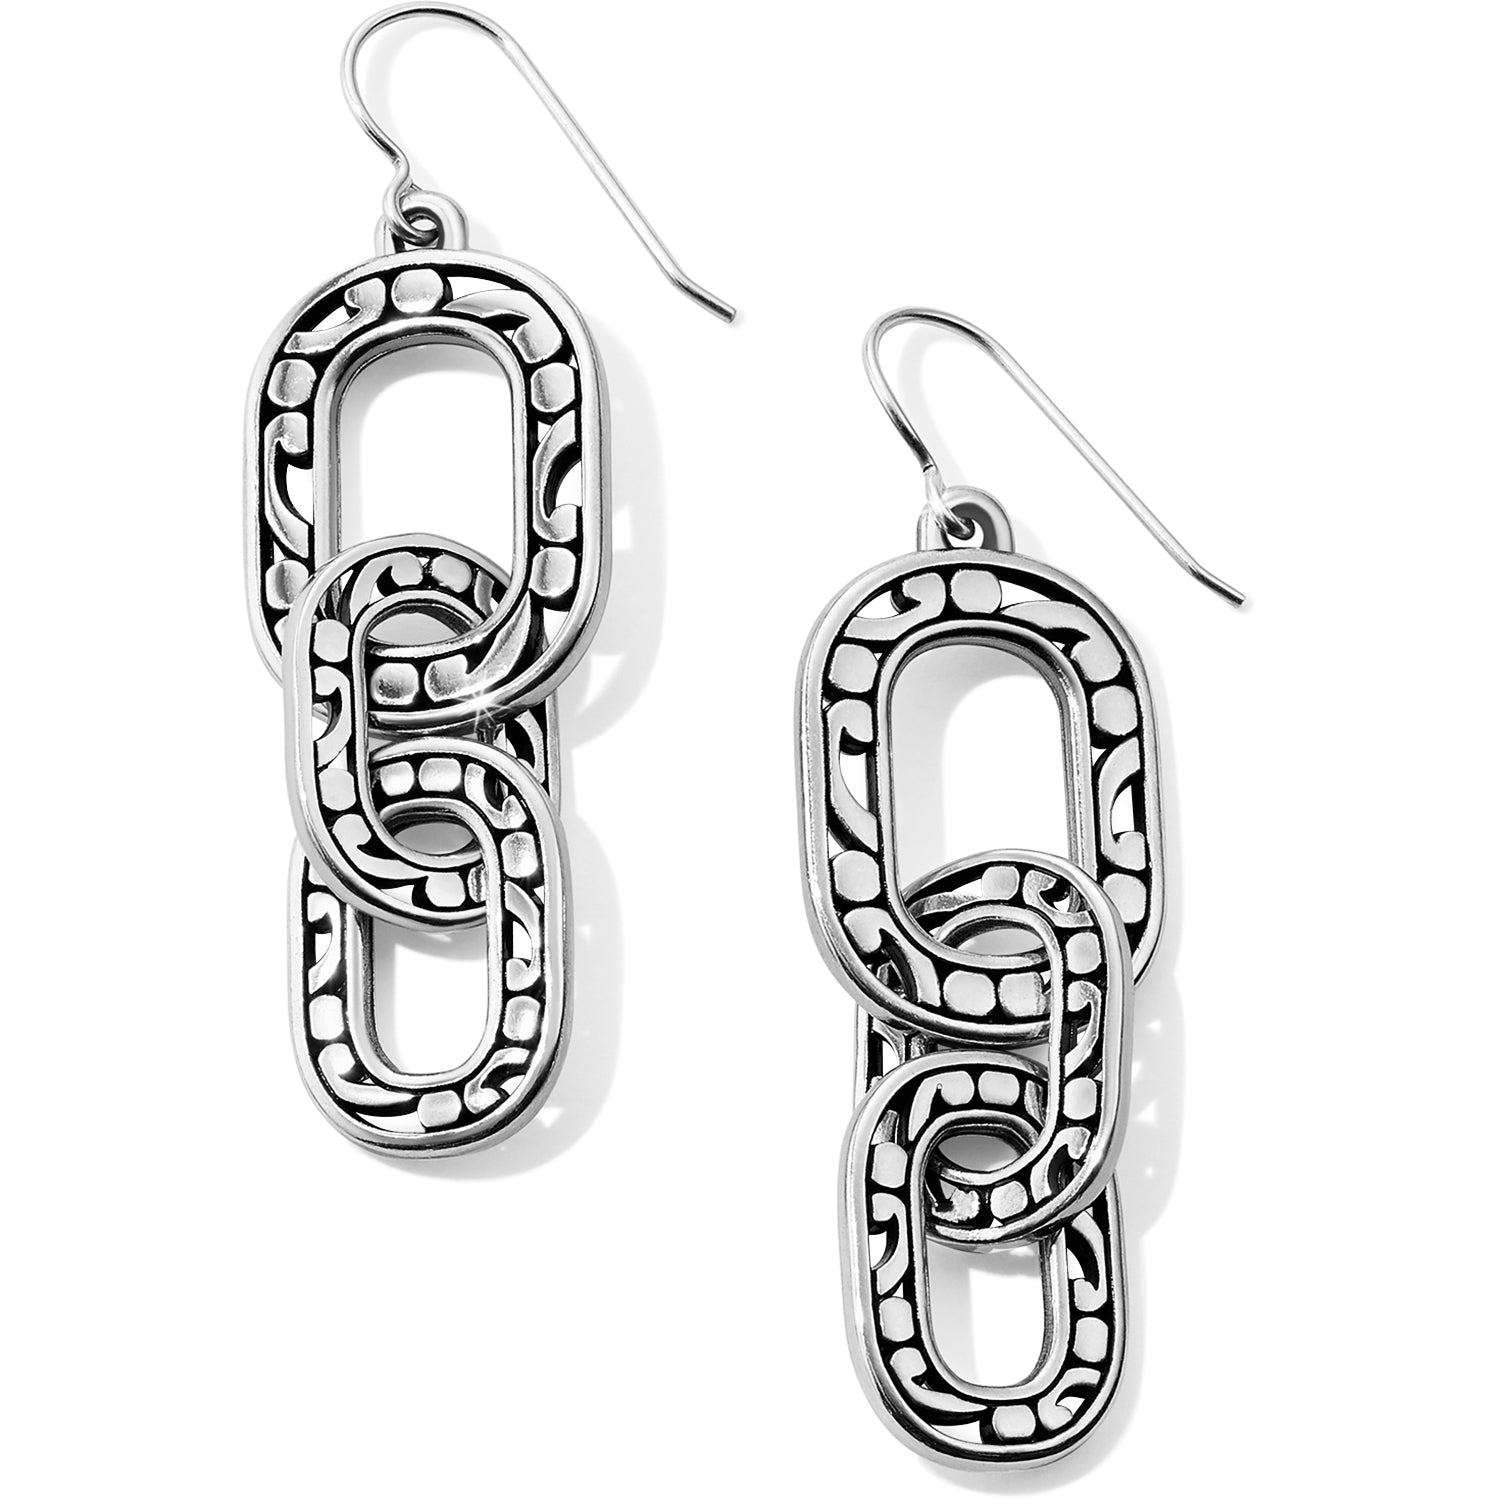 Link drops take a feminine turn when embellished with Brighton's Contempo motif, its swirls and scrolls softening them with uncommon grace. Width: 5/8" Type: French Wire Drop: 1 3/4" Finish: Silver plated